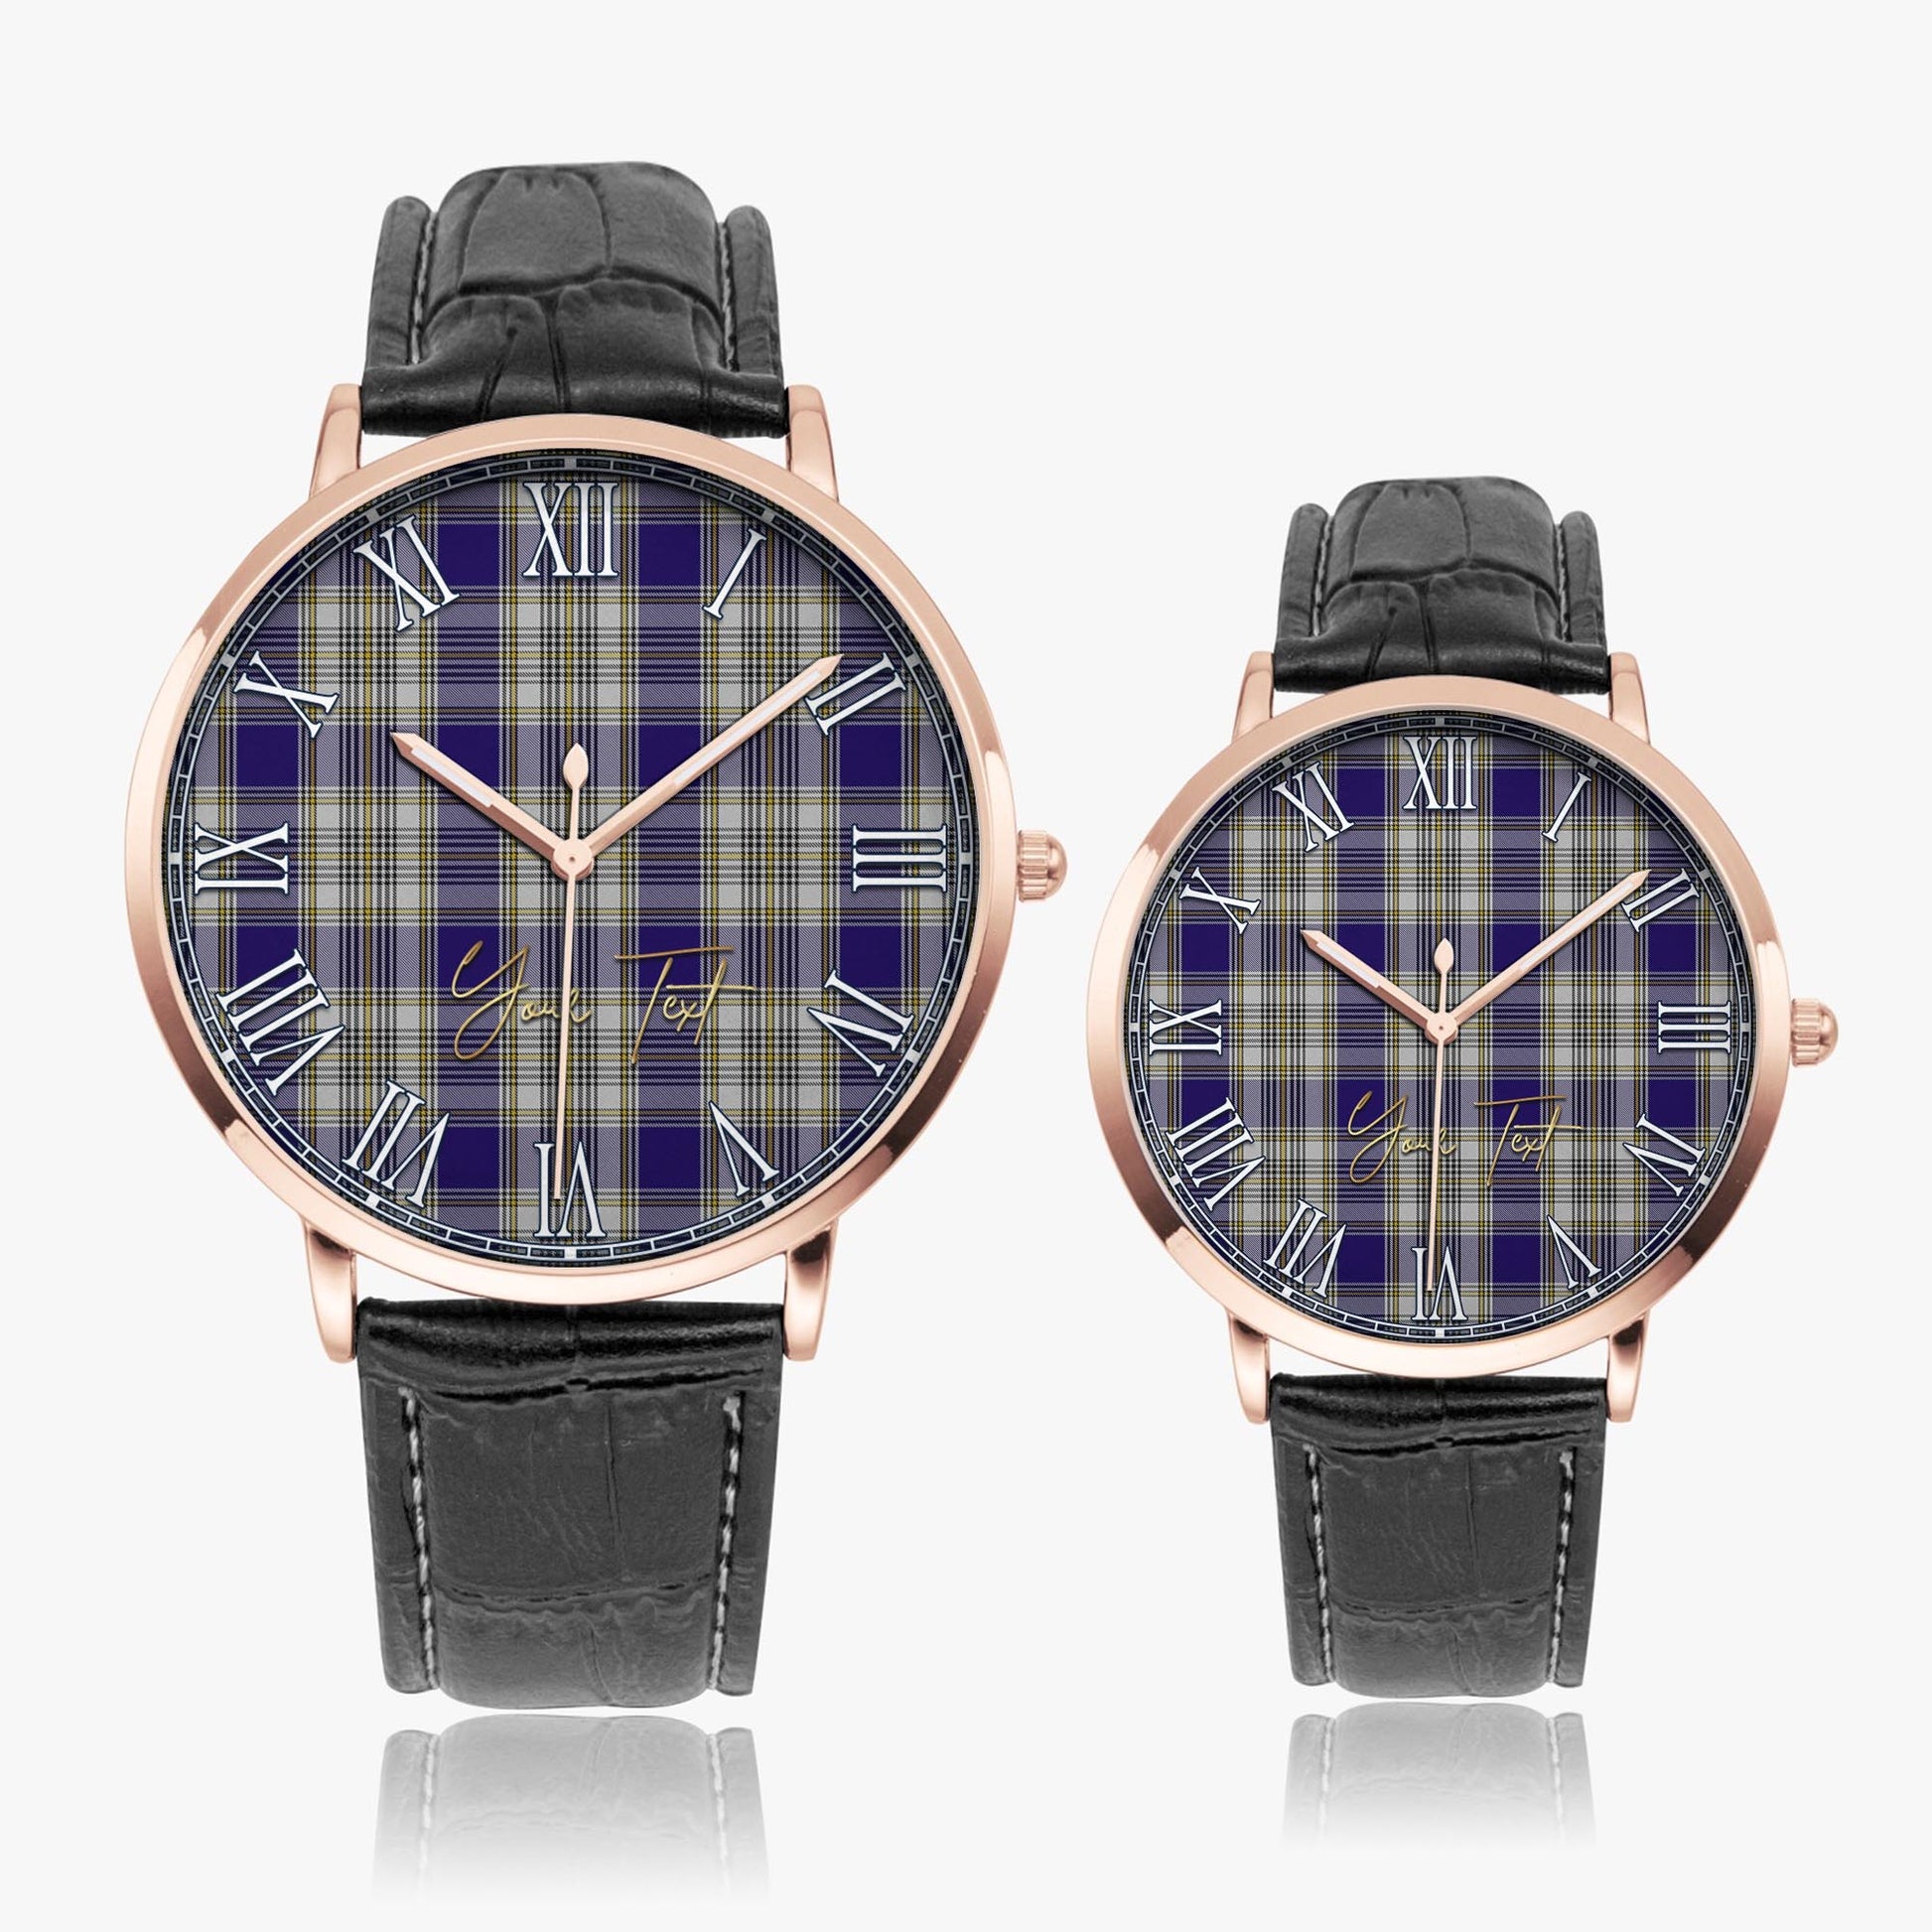 Livingston Dress Tartan Personalized Your Text Leather Trap Quartz Watch Ultra Thin Rose Gold Case With Black Leather Strap - Tartanvibesclothing